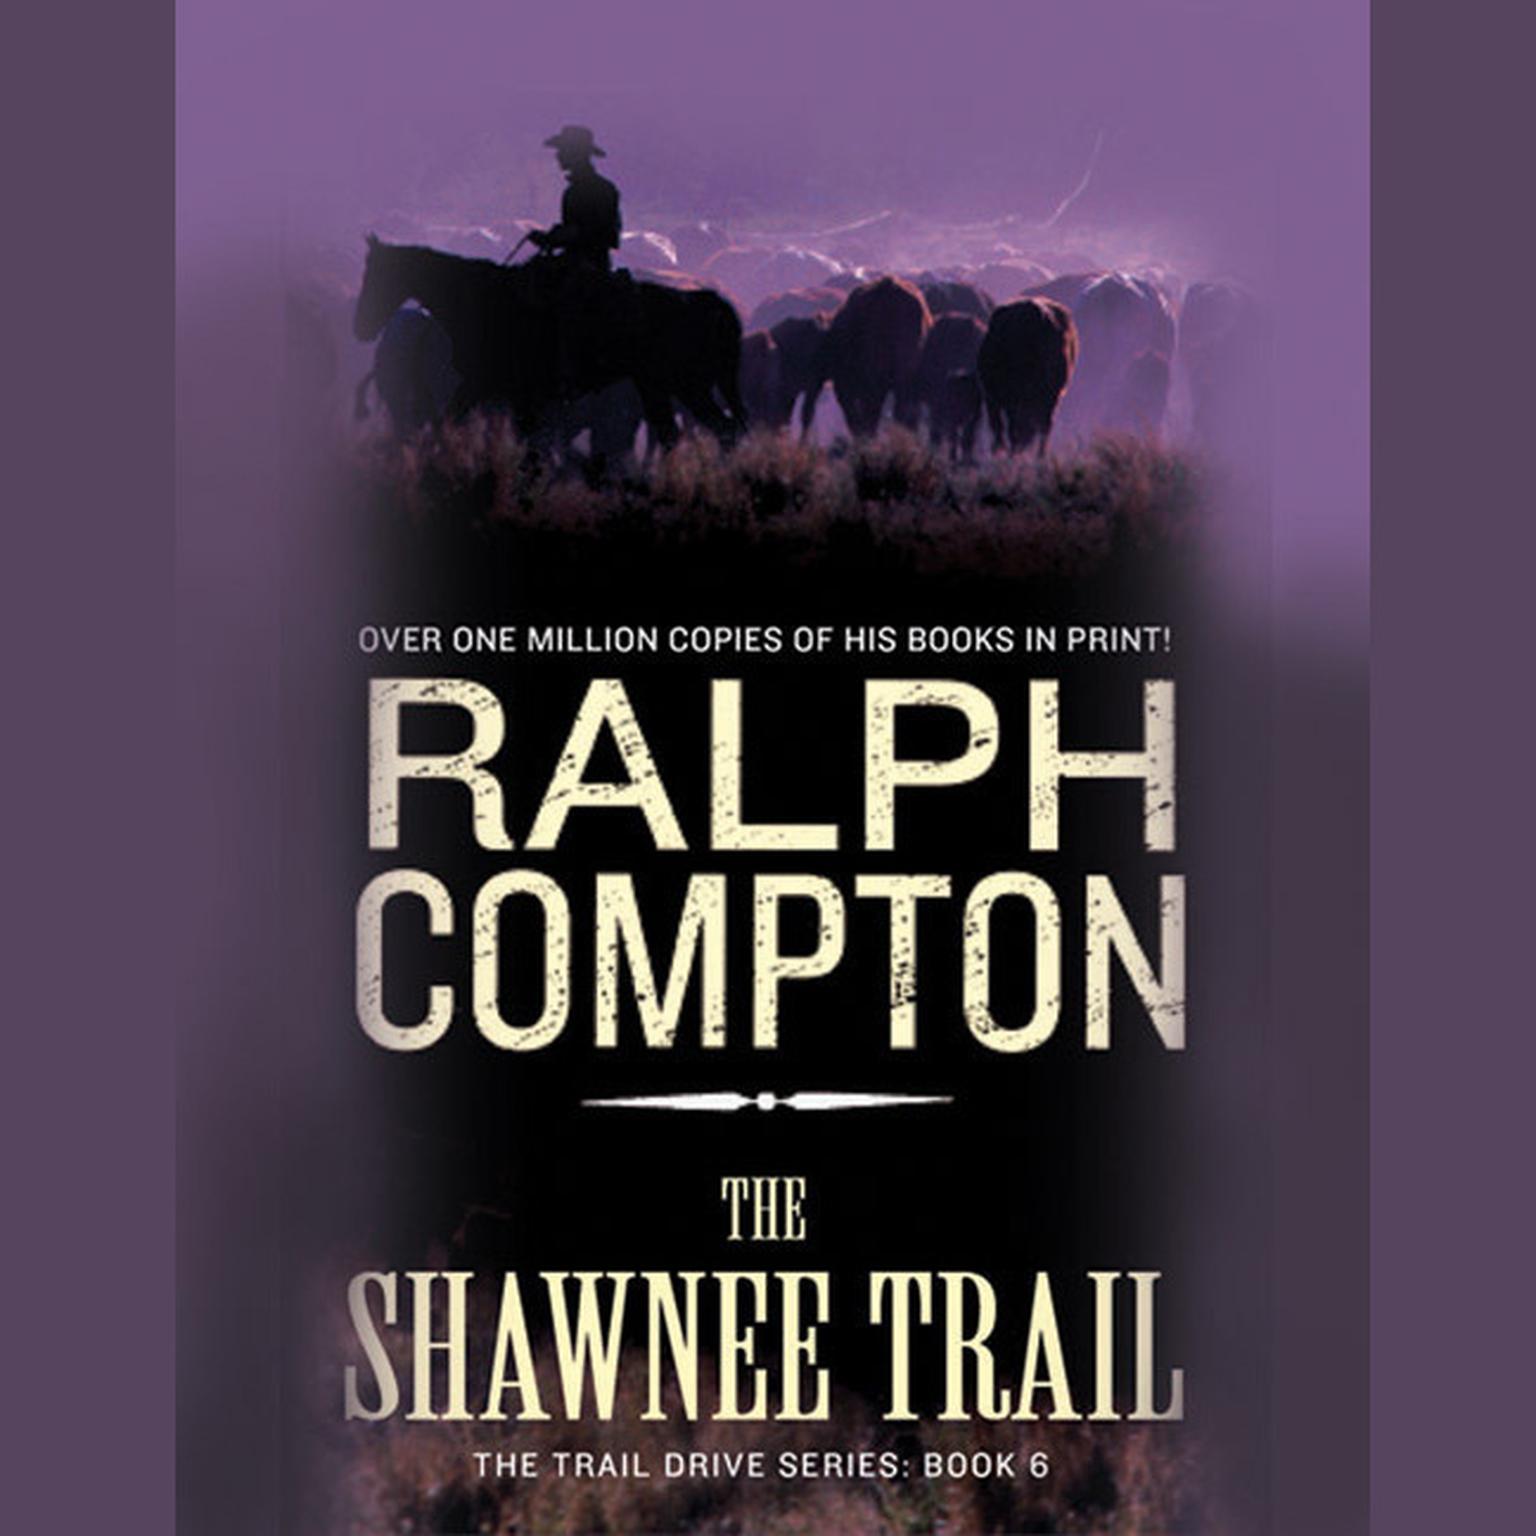 The Shawnee Trail (Abridged): The Trail Drive, Book 6 Audiobook, by Ralph Compton